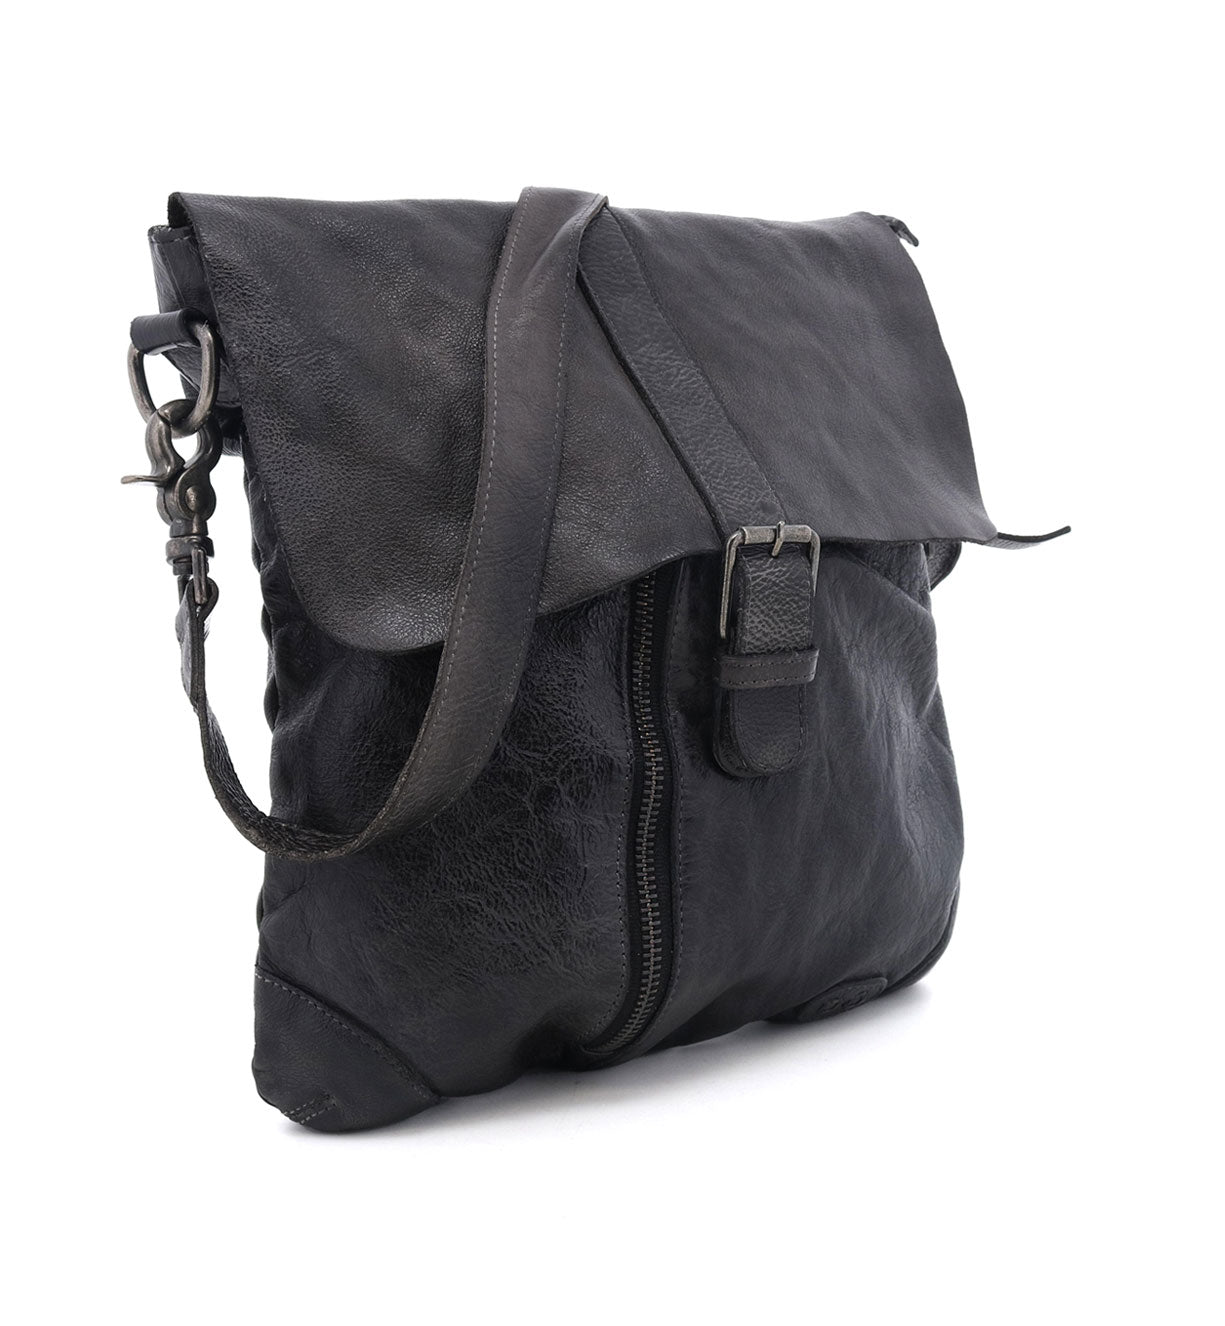 A black leather crossbody bag with a strap named Jack by Bed Stu.